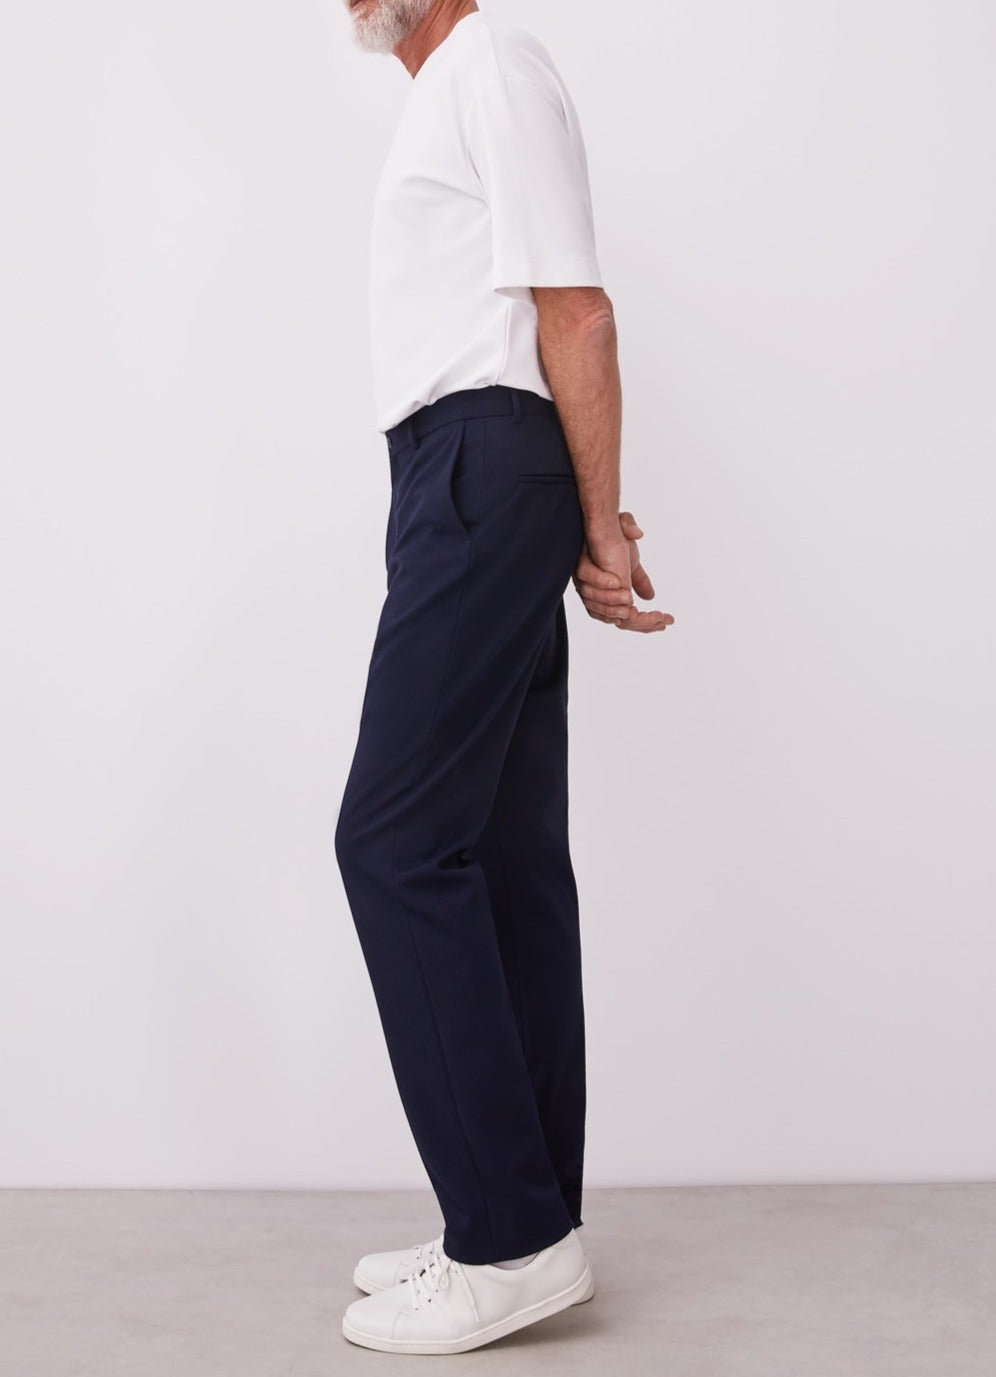 Men Trousers | Blue Twill Chino Trousers by Spanish designer Adolfo Dominguez